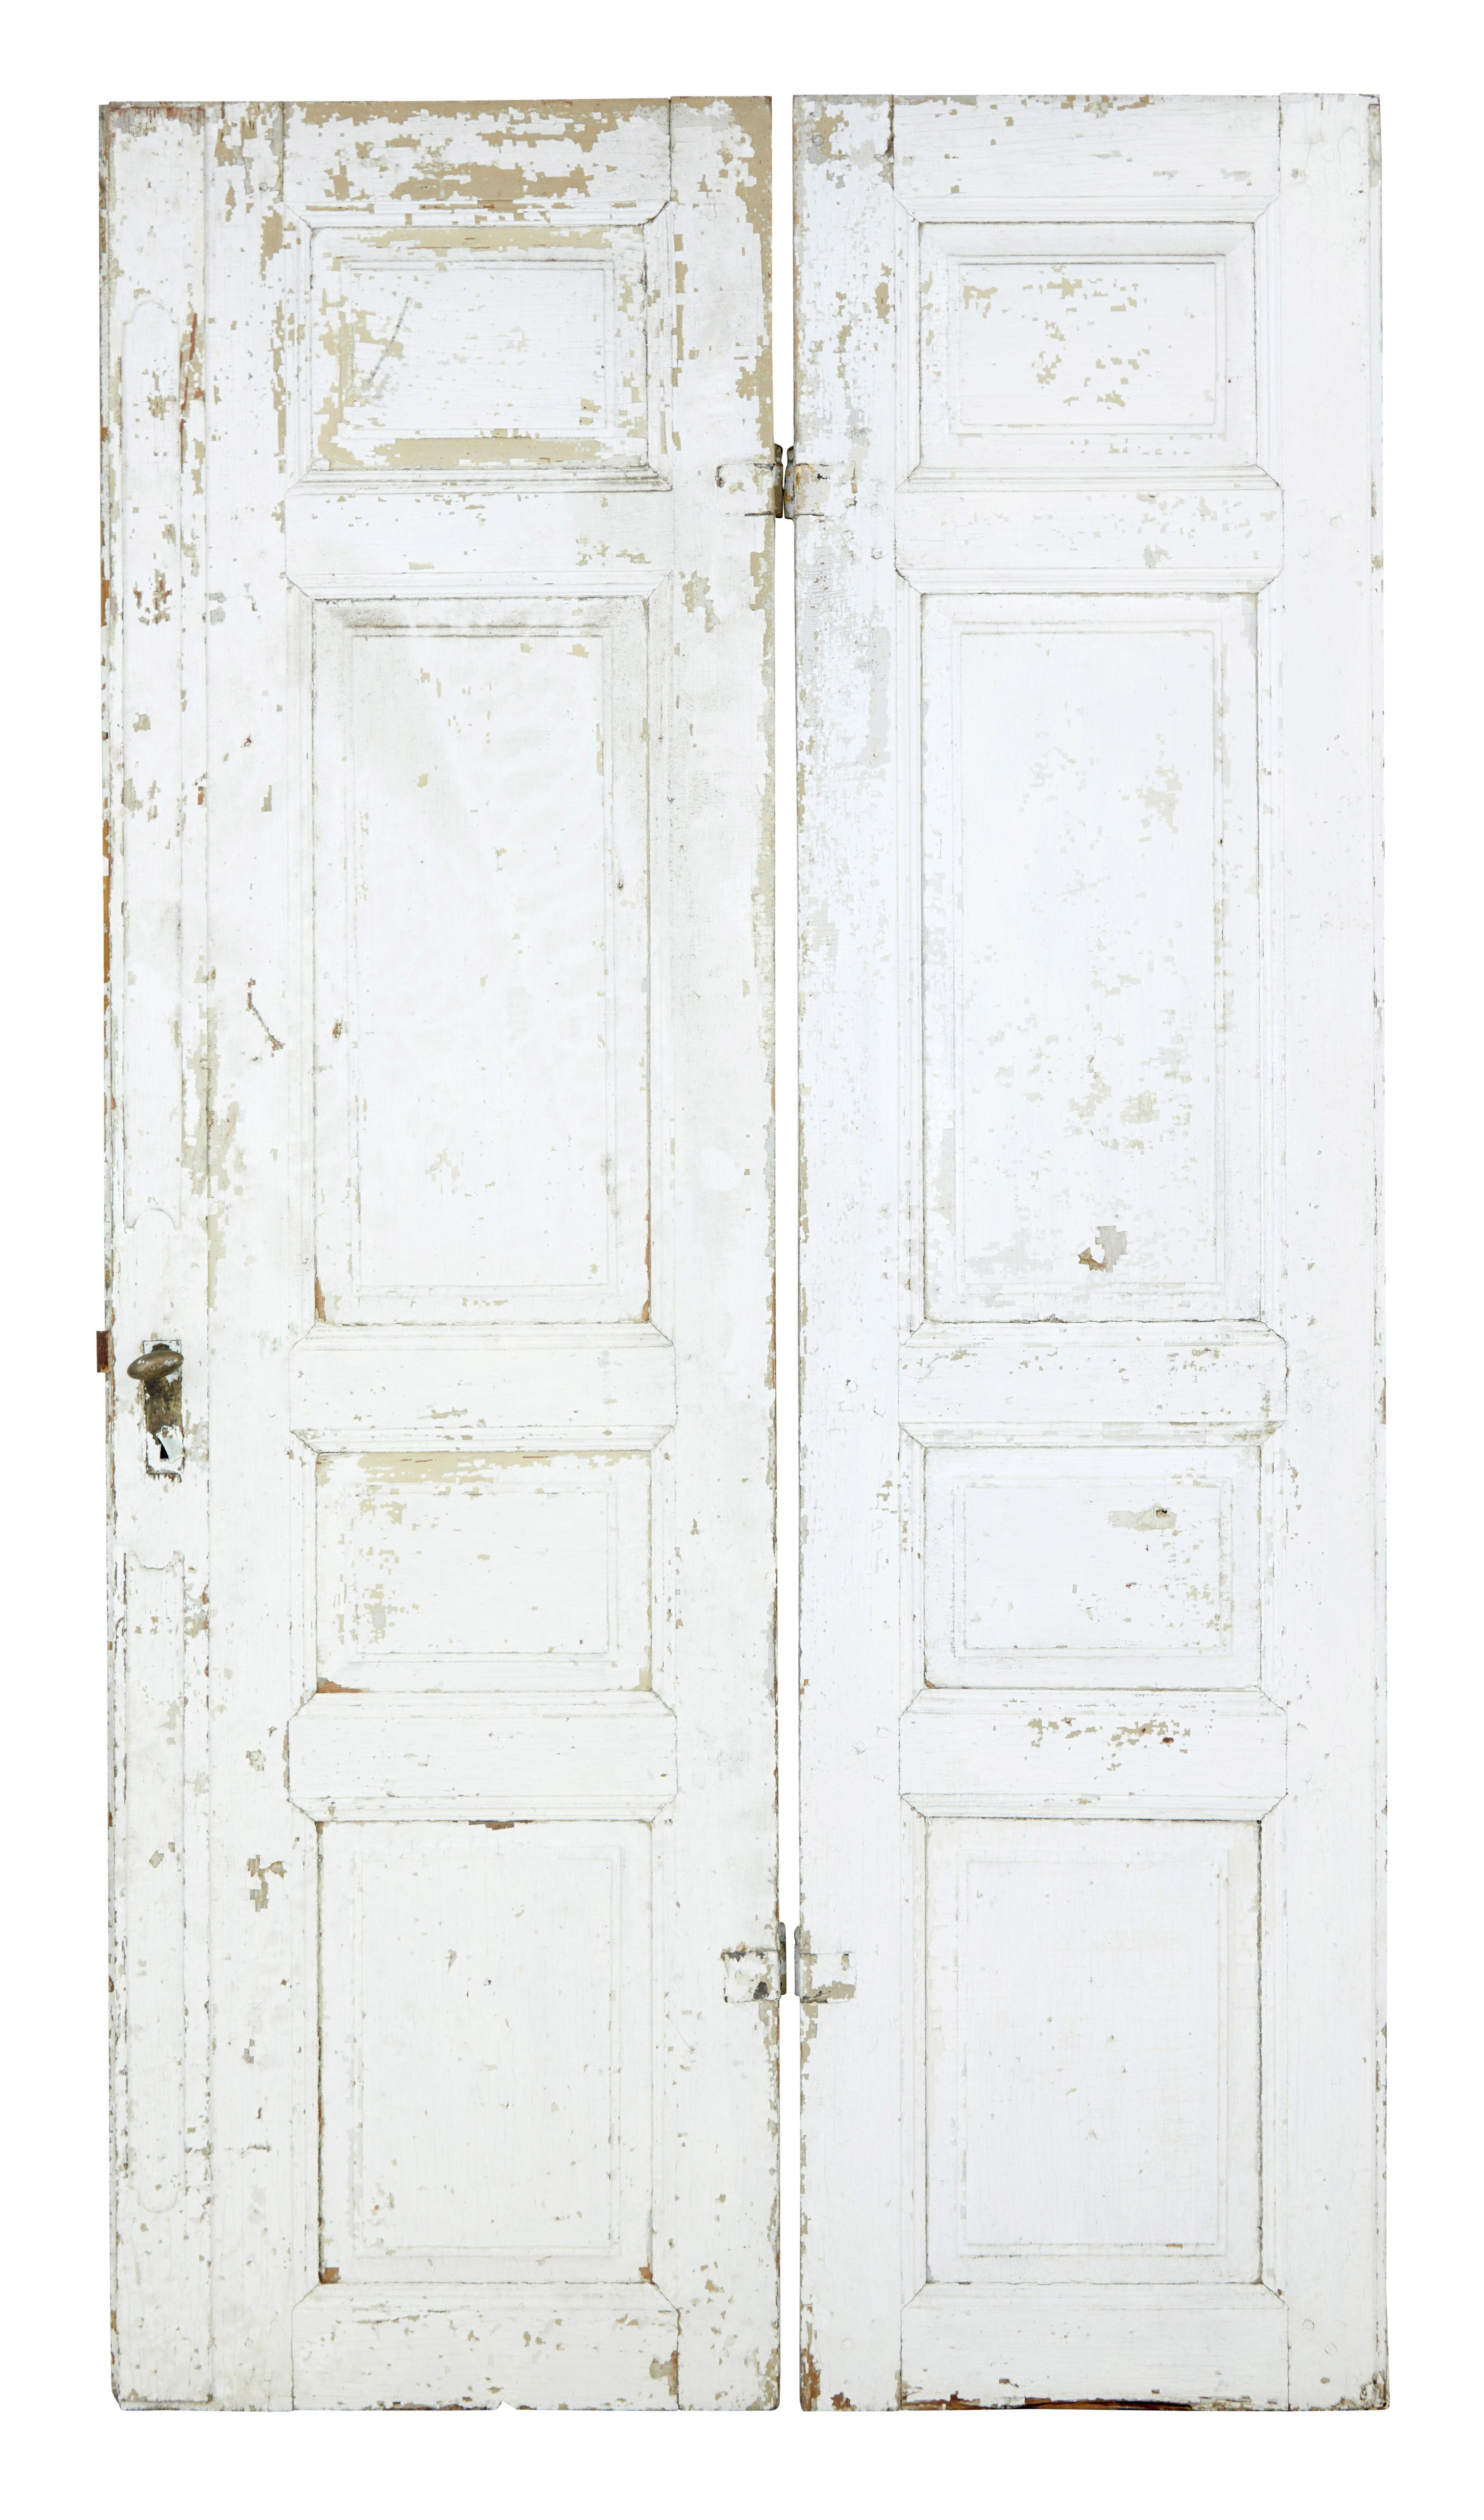 Good quality pair of Swedish painted doors, circa 1880.

Presented in original paint, vivid green on the outside and white on the inside. Still fitted with original hardware but no key present.

Ideal as a wall decoration or for installation as